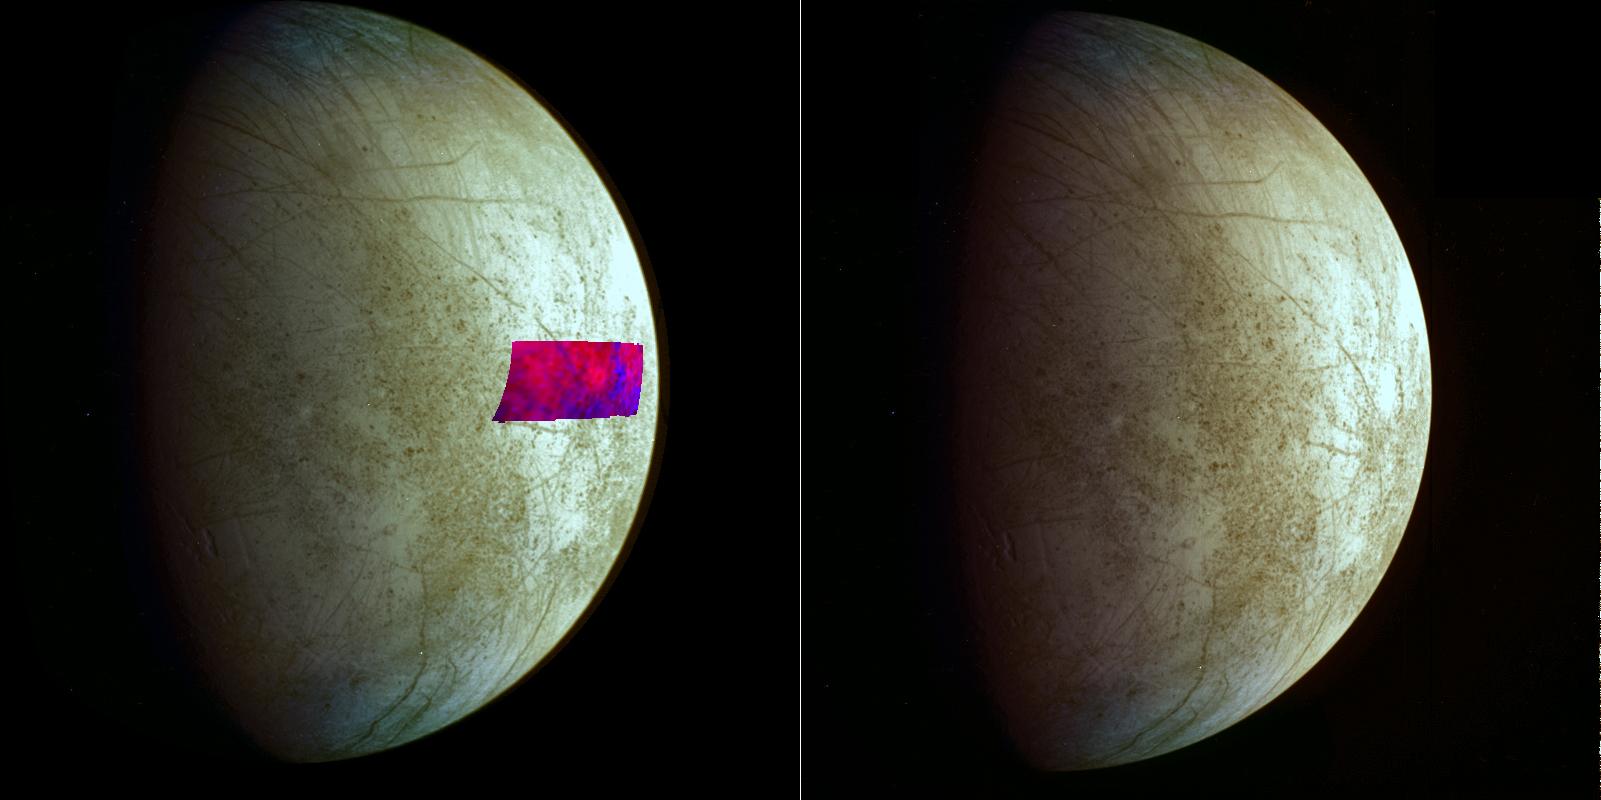 two color, global views of europa, one with a color region superimposed showing the chemical composition of surface features